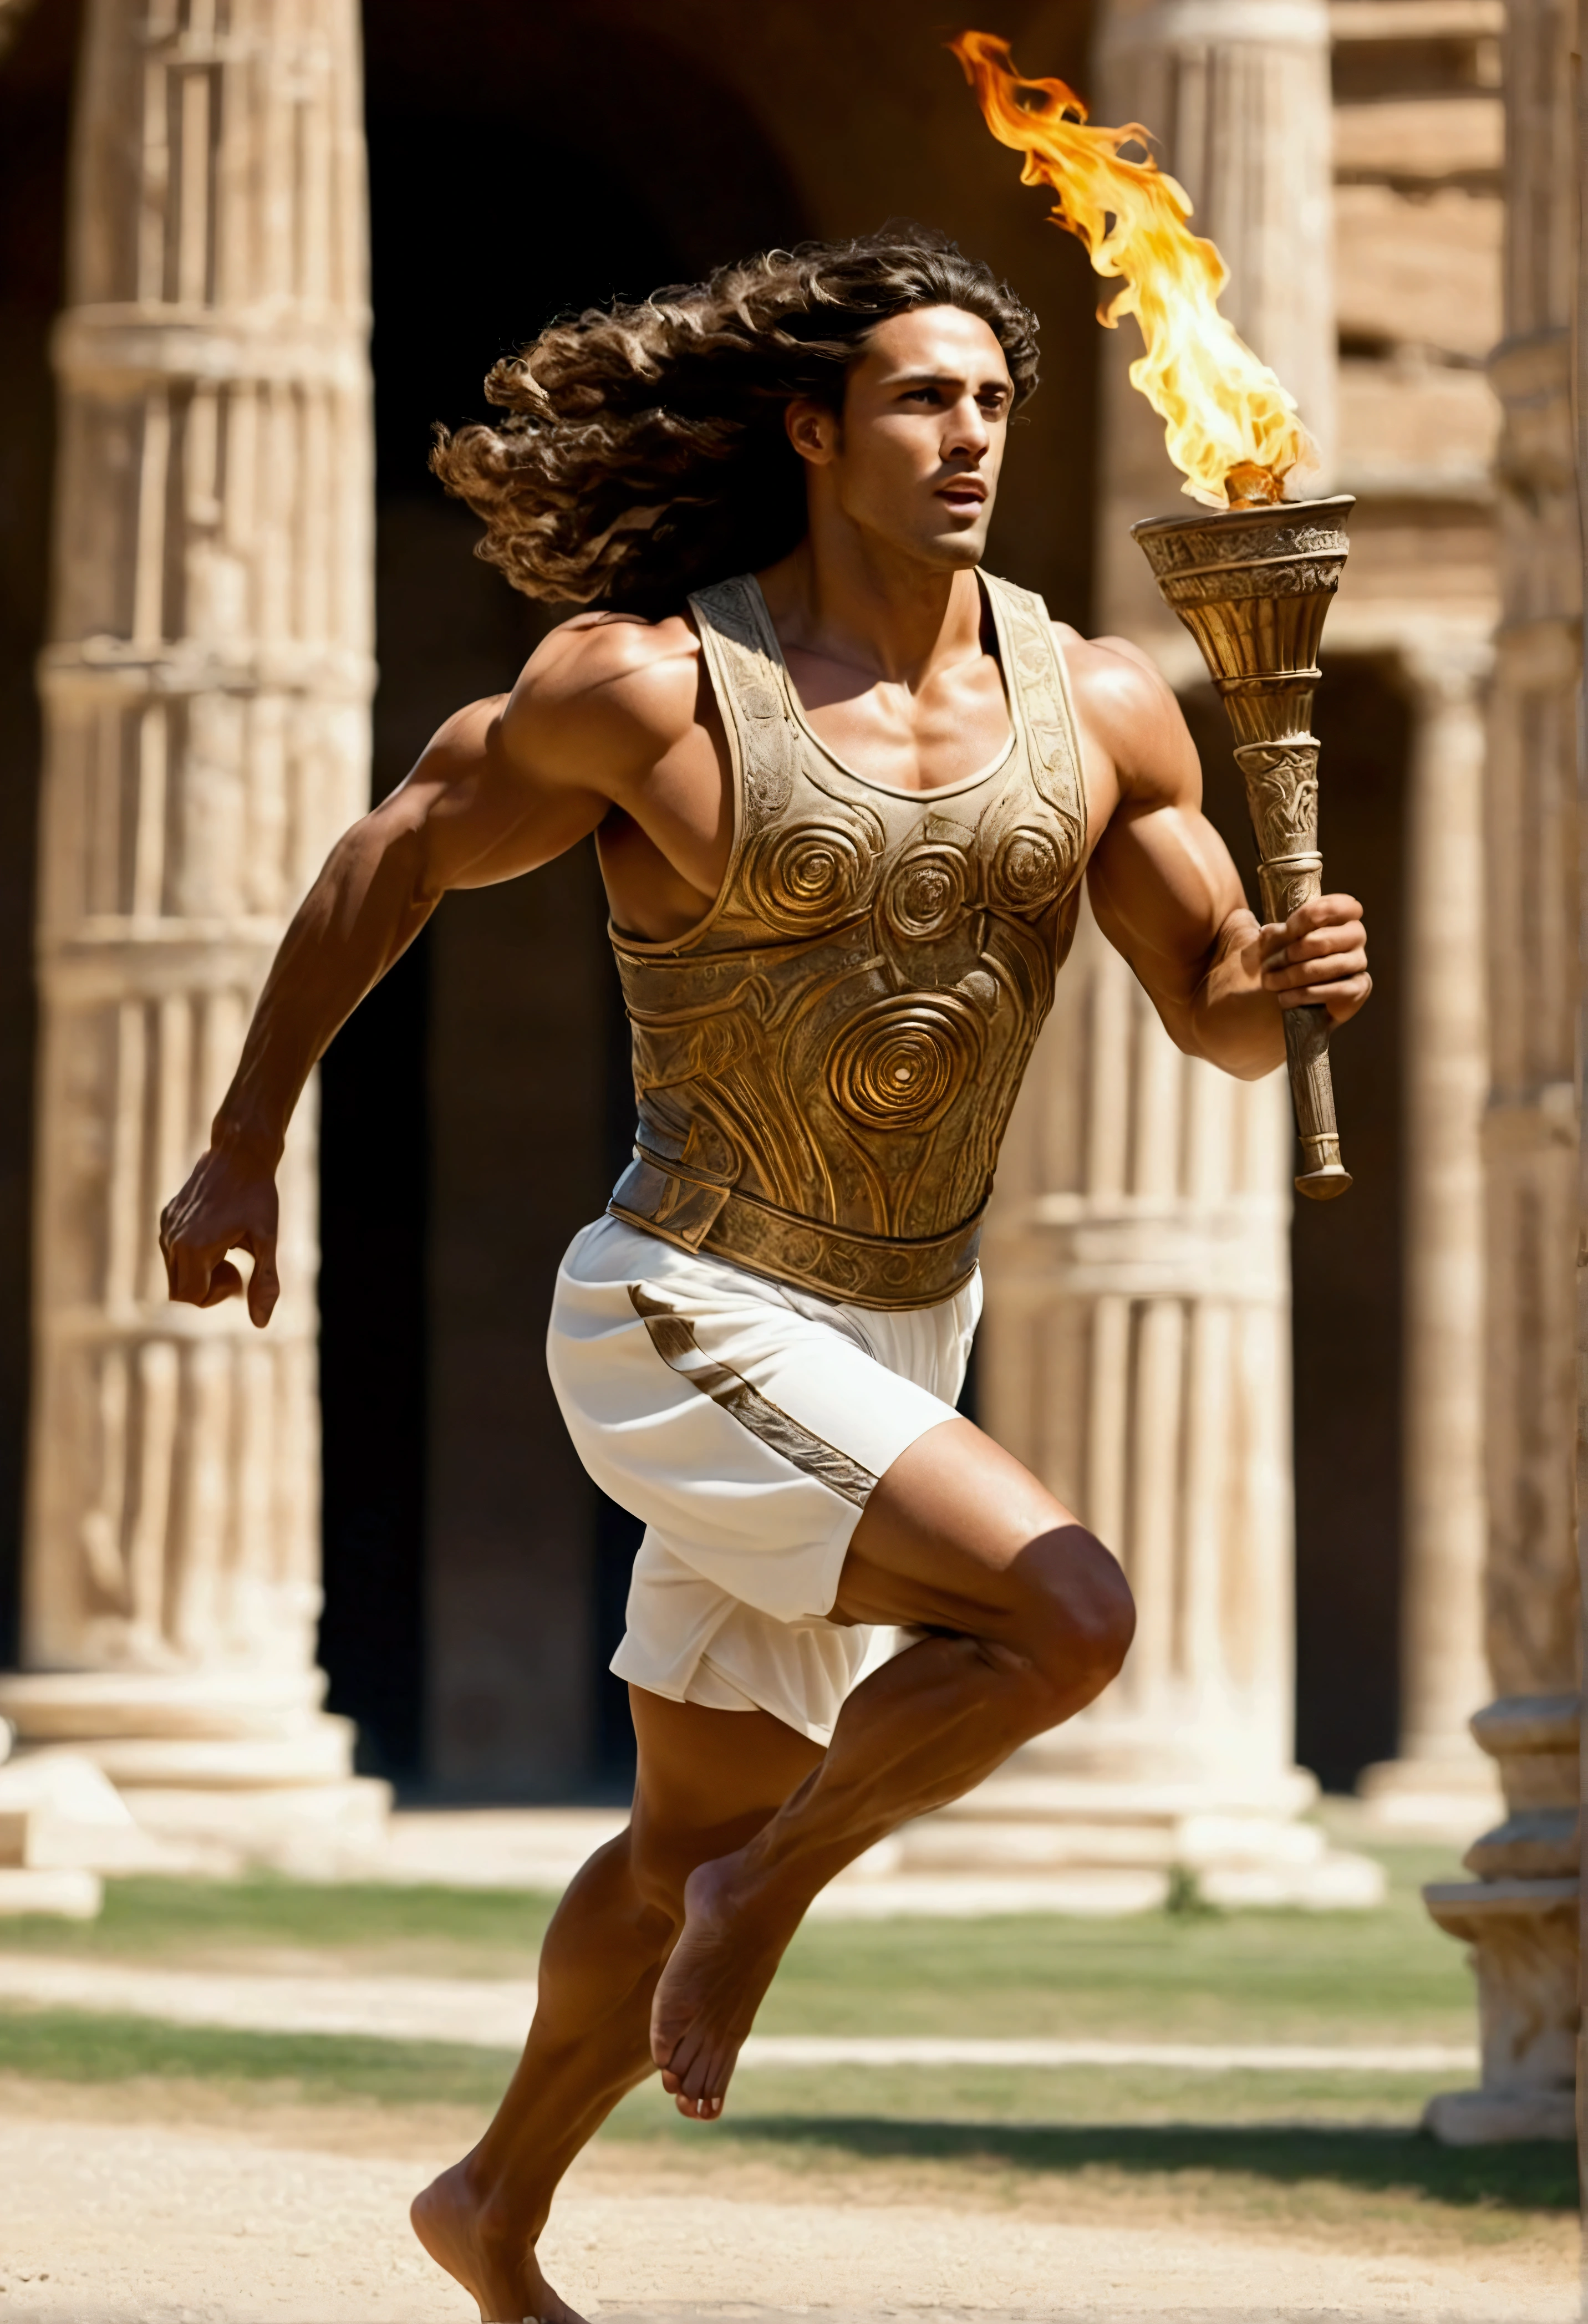 Olympic torchbearer, running with torch, Renaissance elements, full-body, tank-top, muscular, long permed hair, potted, Ancient Greek Colosseum in the background